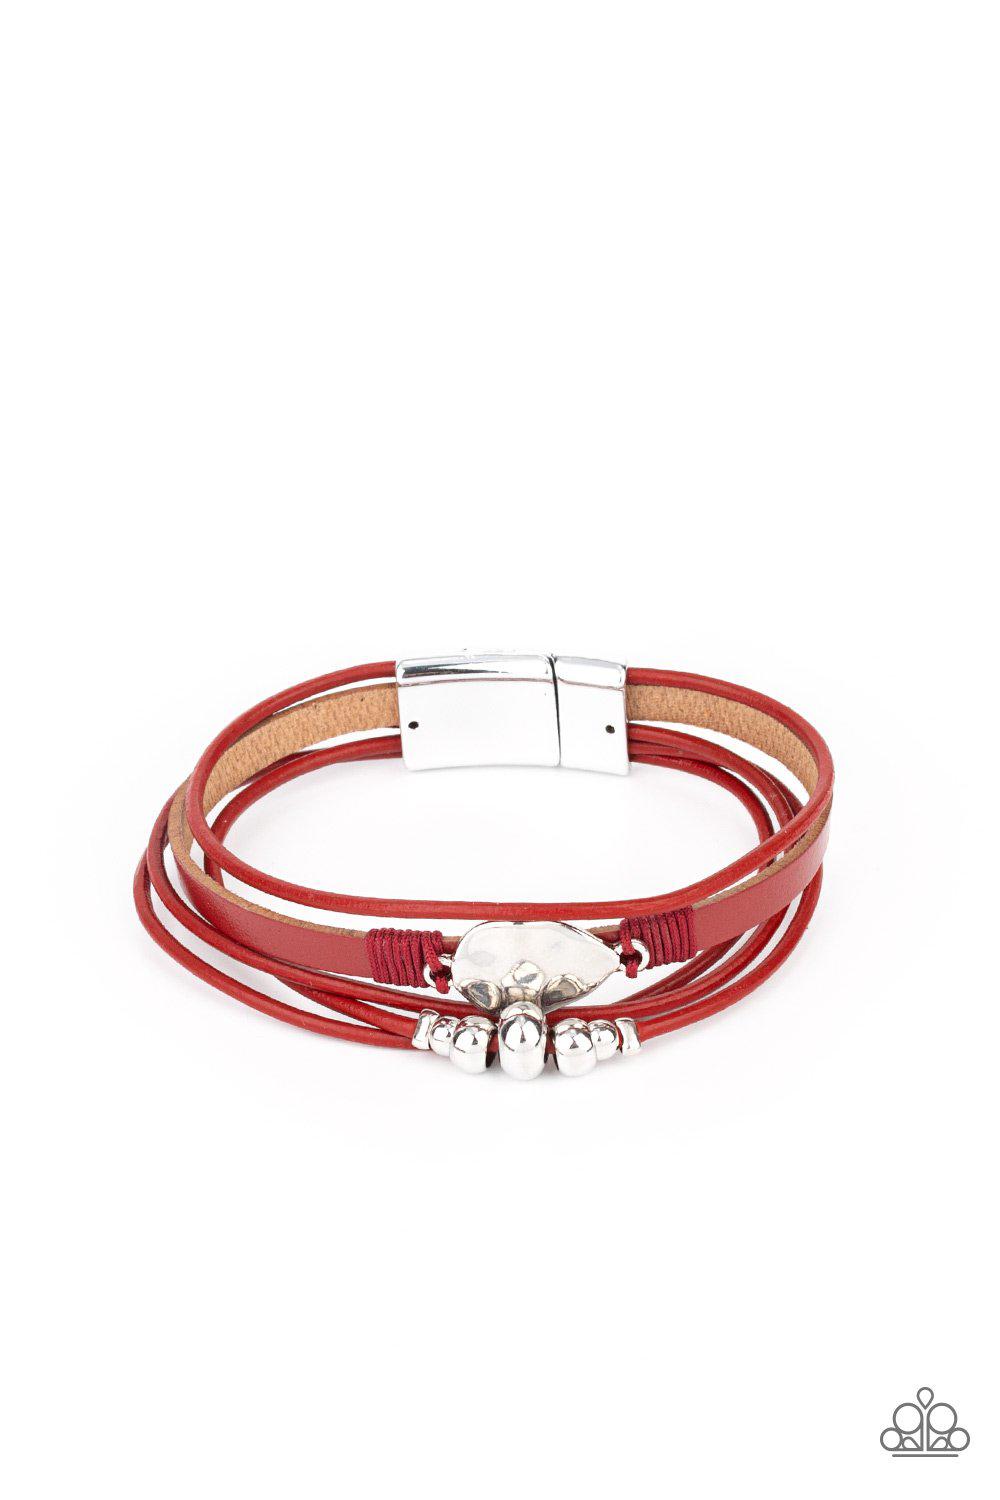 Tahoe Tourist Red Leather and Silver Magnetic Bracelet - Paparazzi Accessories 2021 Convention Exclusive- lightbox - CarasShop.com - $5 Jewelry by Cara Jewels